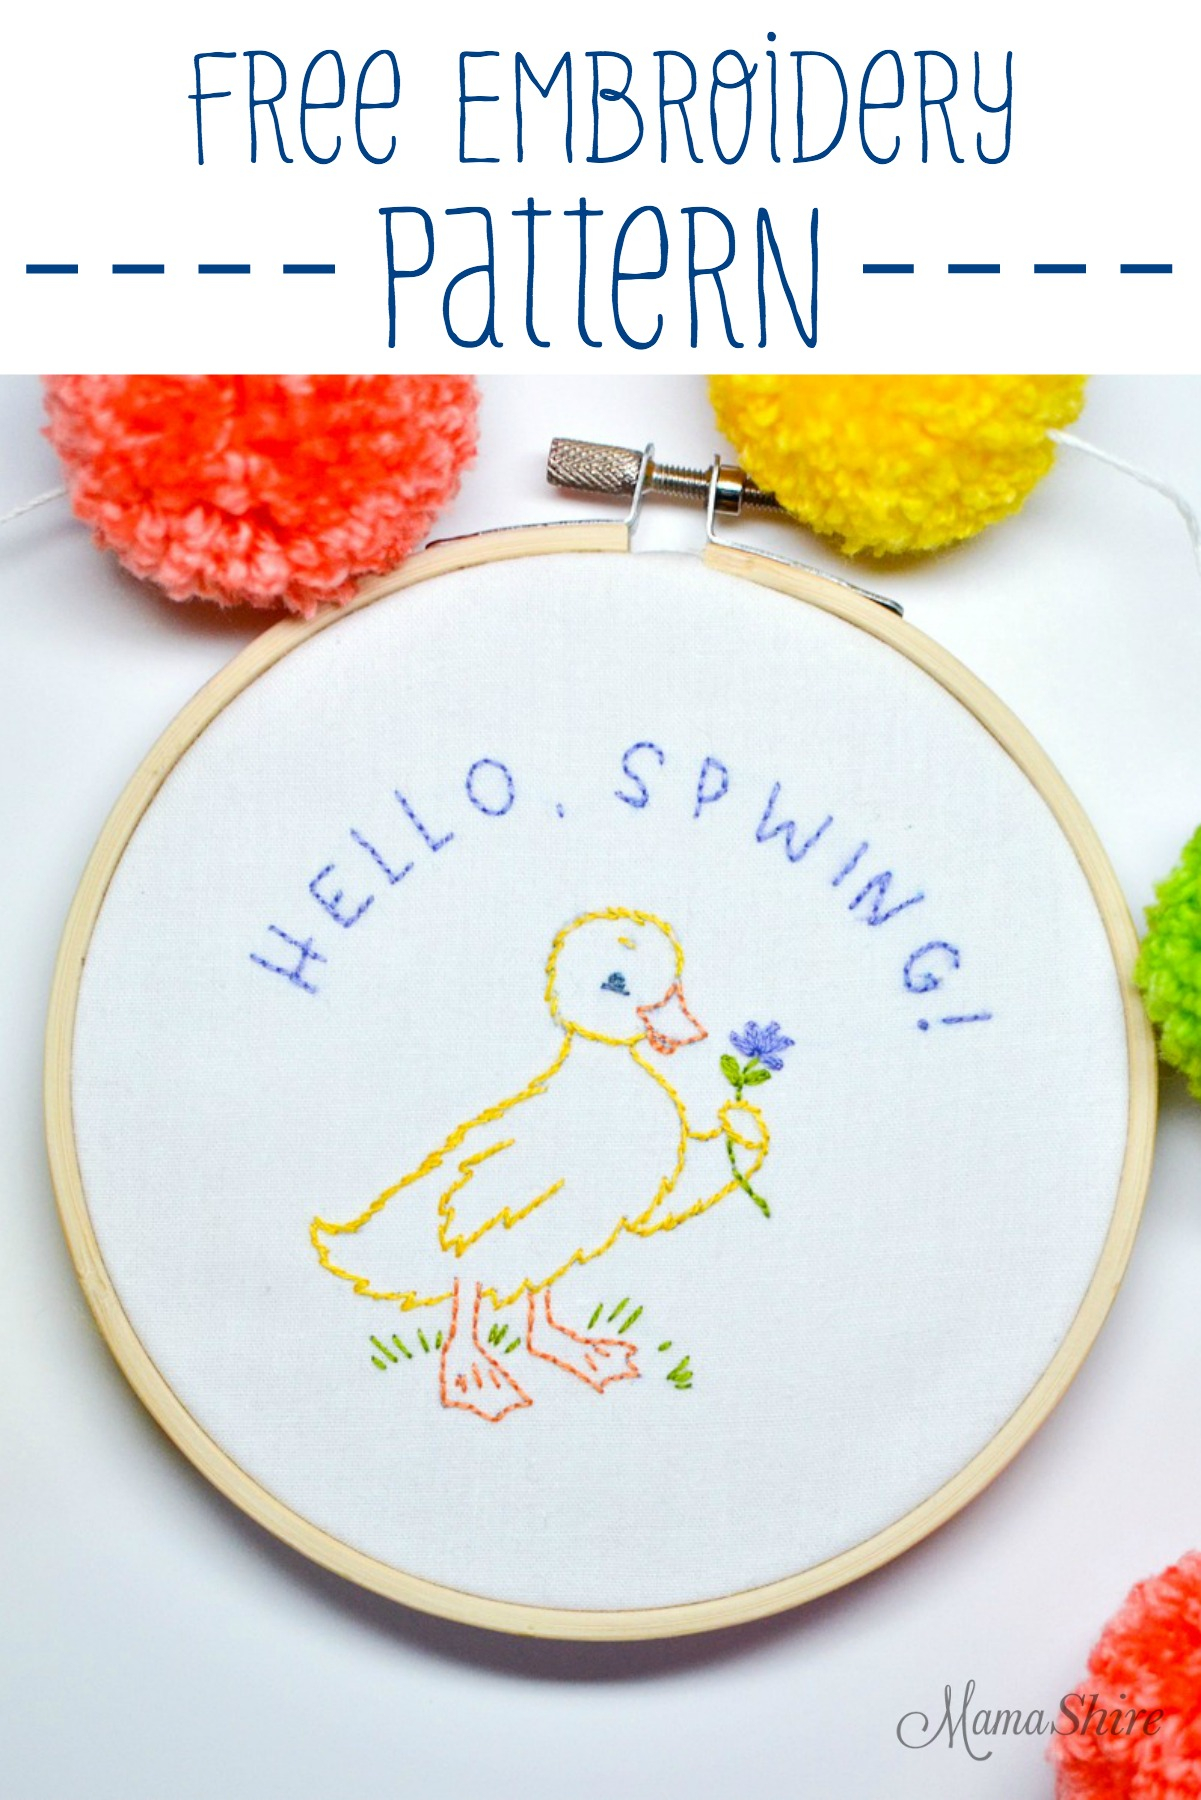 Free Embroidery Pattern Free Embroidery Pattern For Spring Hello Spwing Mamashire